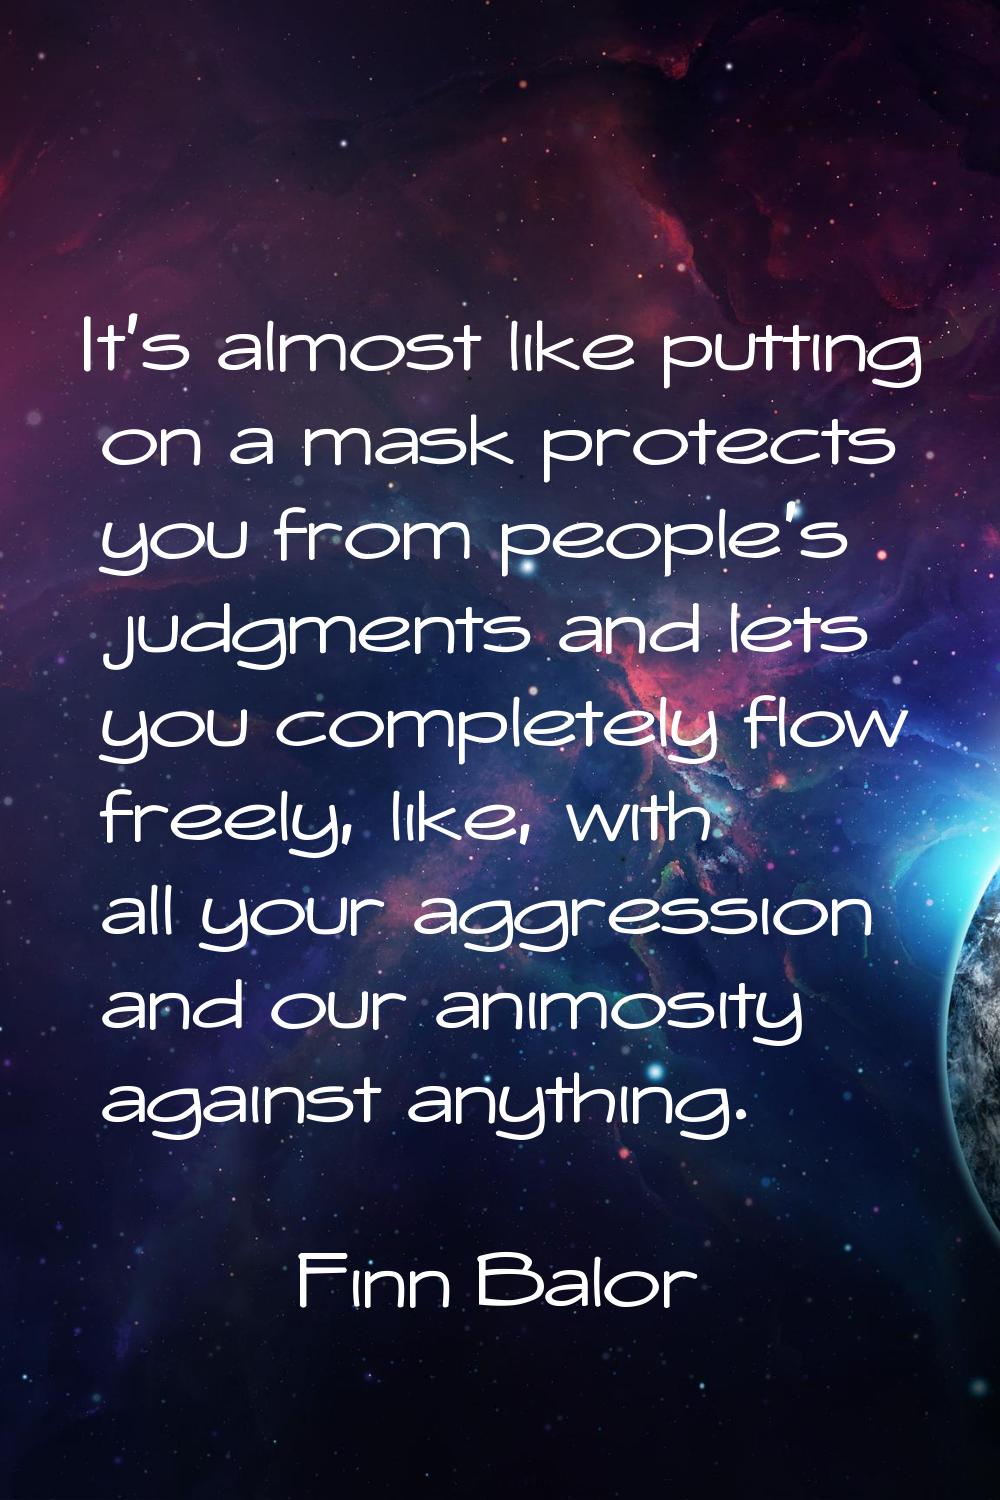 It's almost like putting on a mask protects you from people's judgments and lets you completely flo